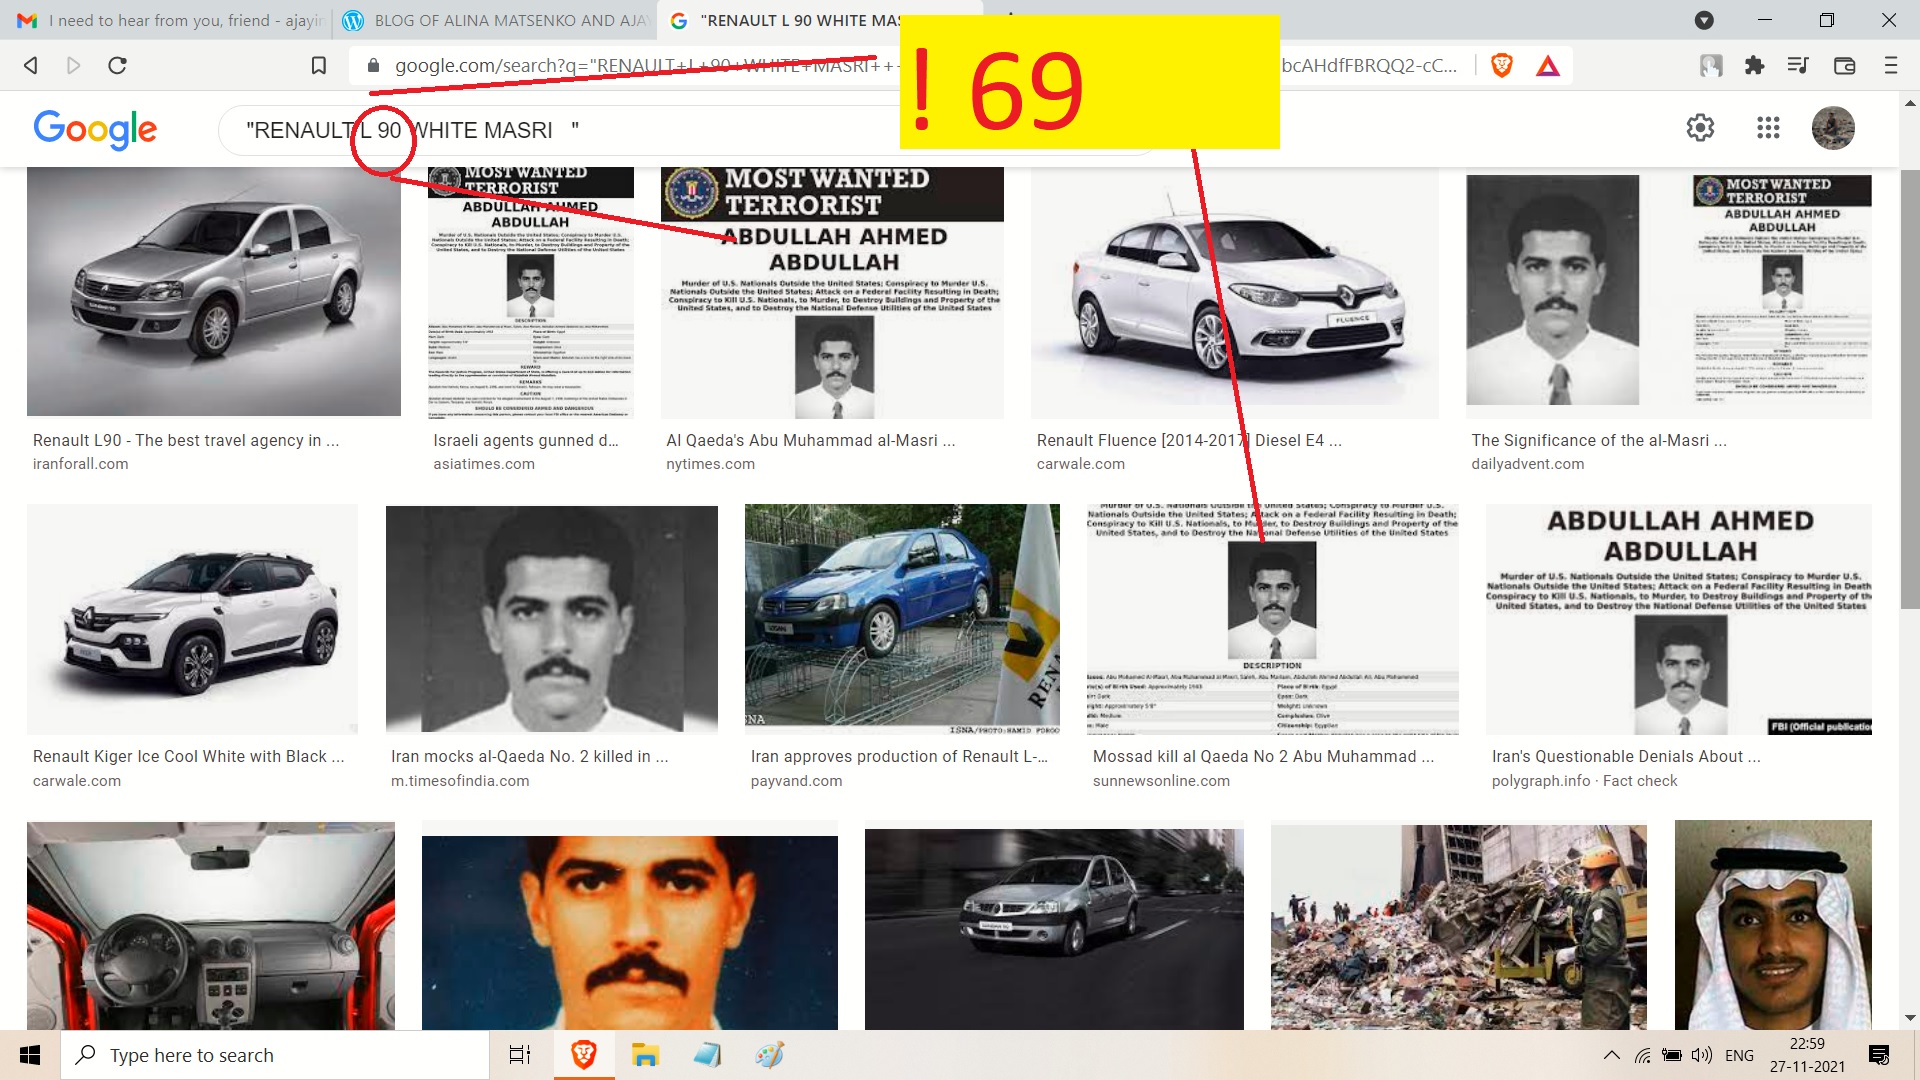 L 90 RENAULT WHITE AL MASRI - DEAD - IN IRAN - THIS IS BIN ALDEN MISTE RBIDNE AND BUBBA , ITS CALED MOSSA DDID WHAT IN A CAR AND 6 AND 9 DID ME SAY IS WHAT WINE